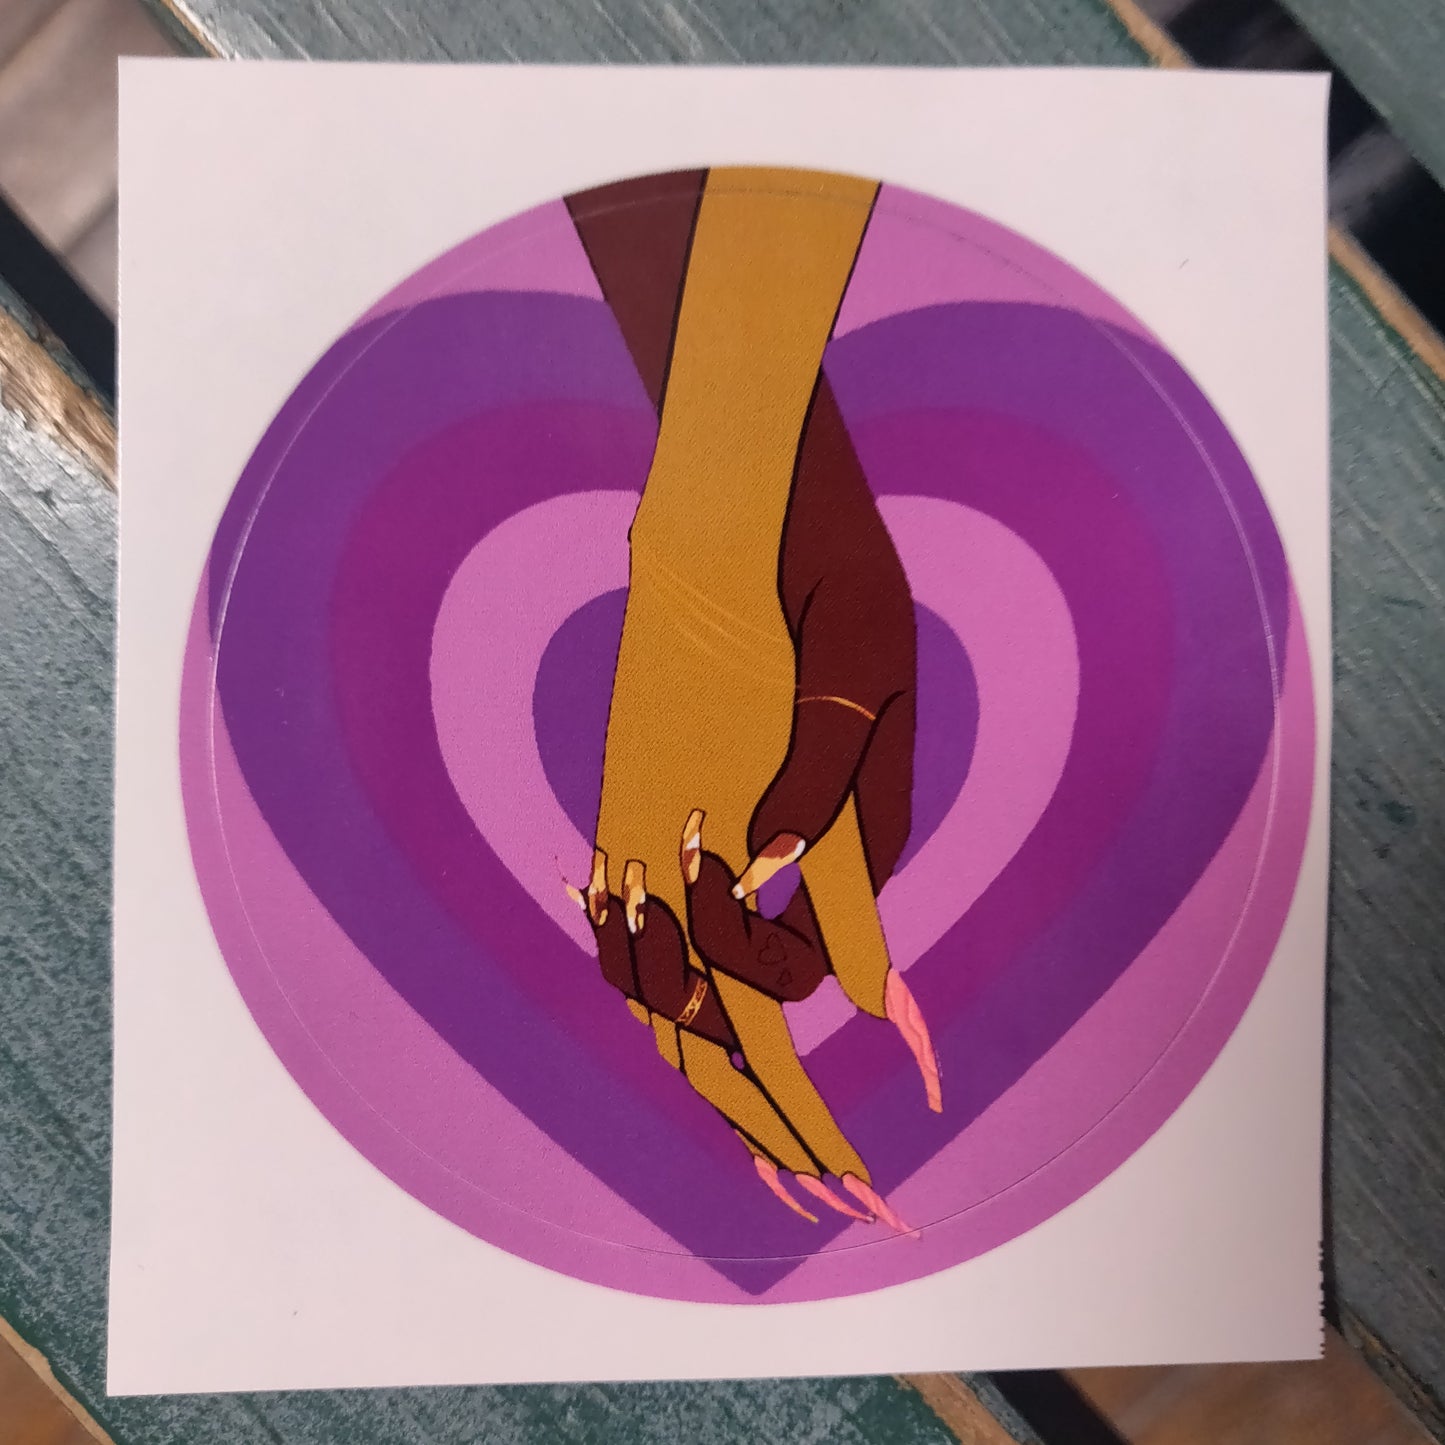 Hold Me STICKERs by Chelsey Luster